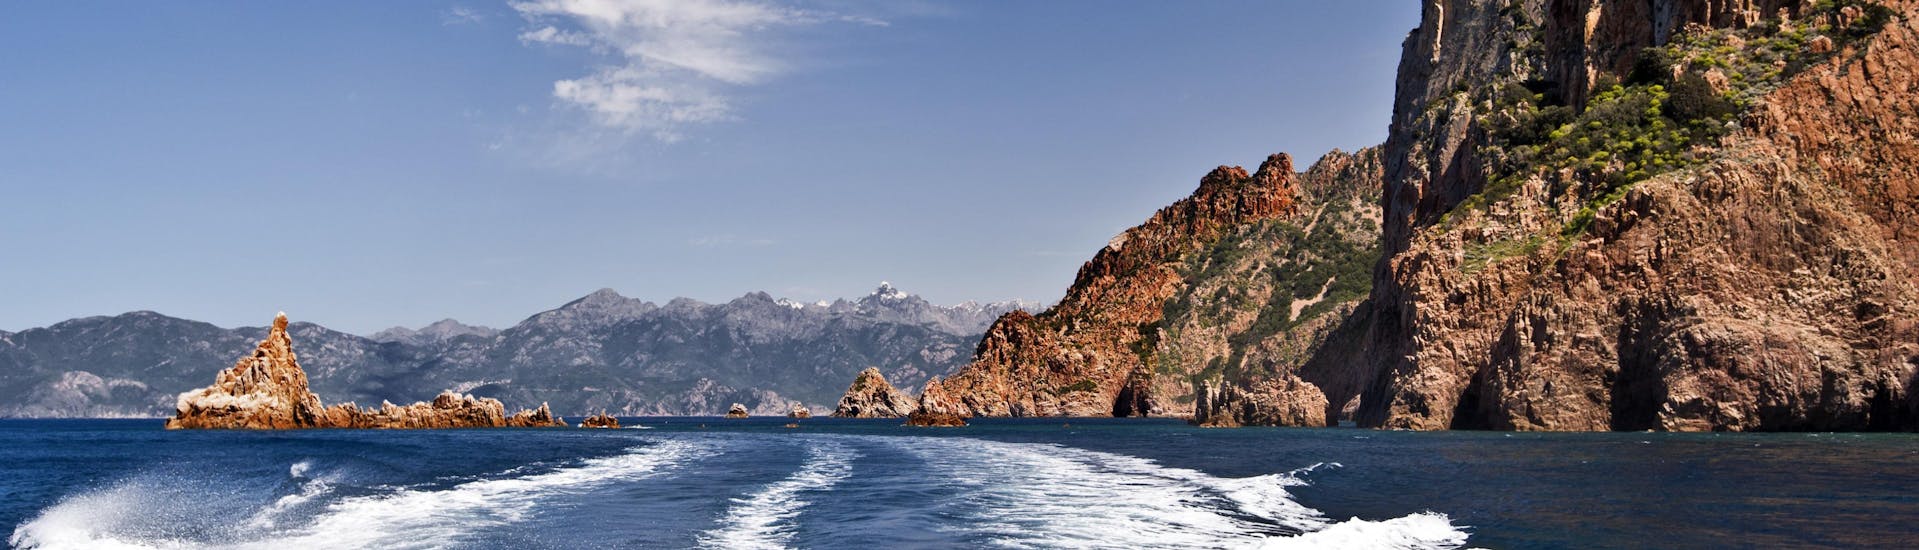 View from the back of a boat during a boat trip from Sagone to the impressive Calanques de Piana on the west coast of Corsica.